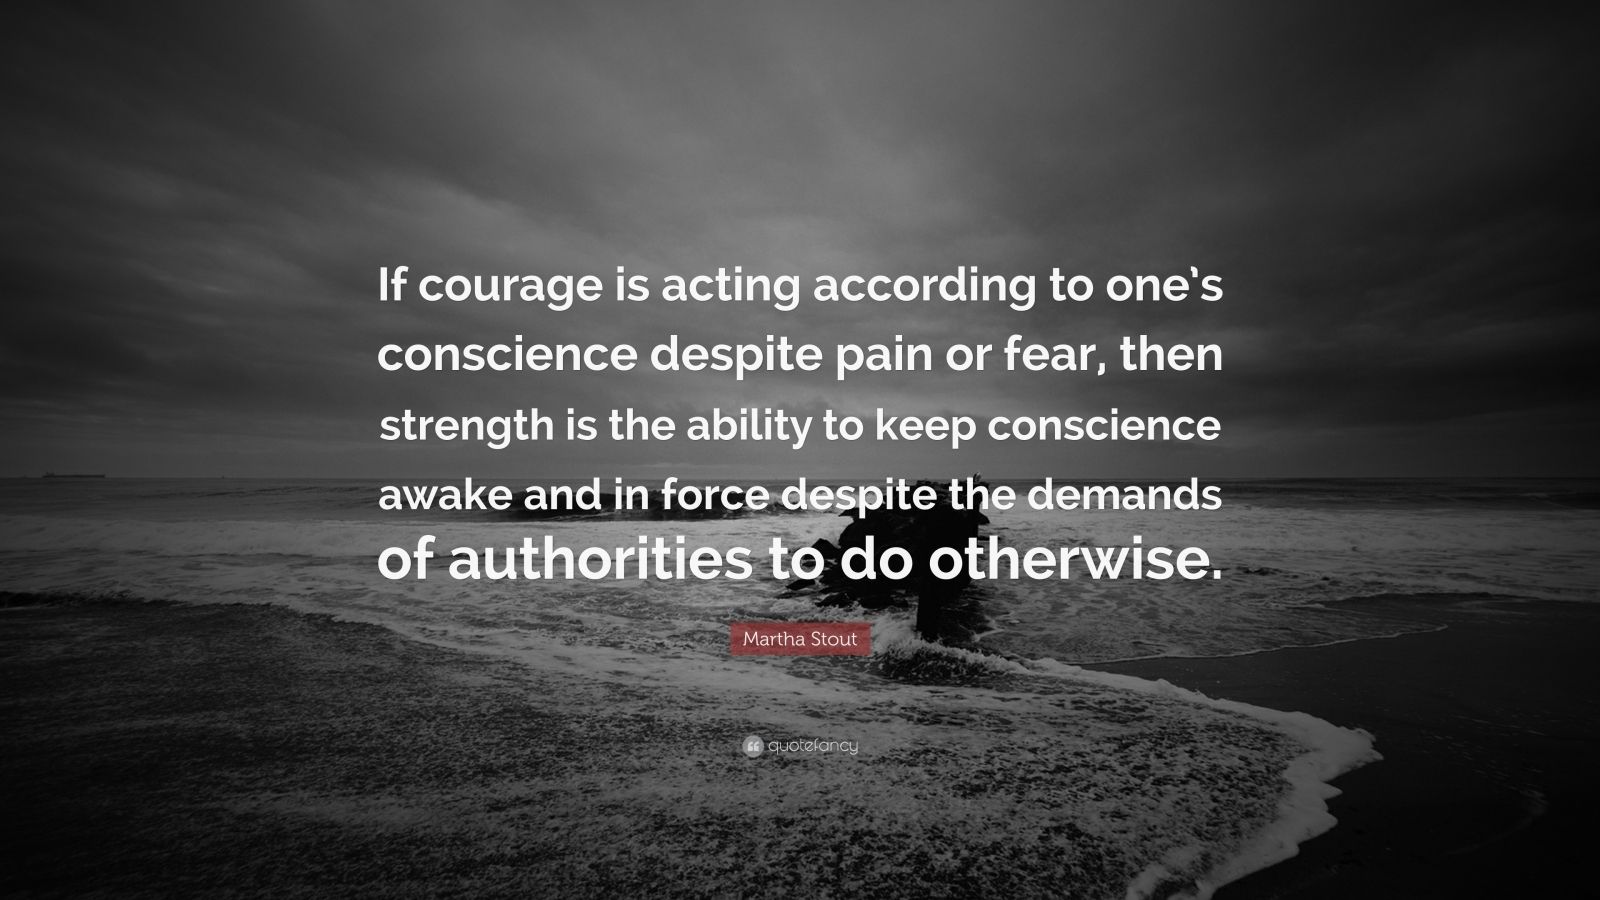 Martha Stout Quote: “If courage is acting according to one’s conscience ...